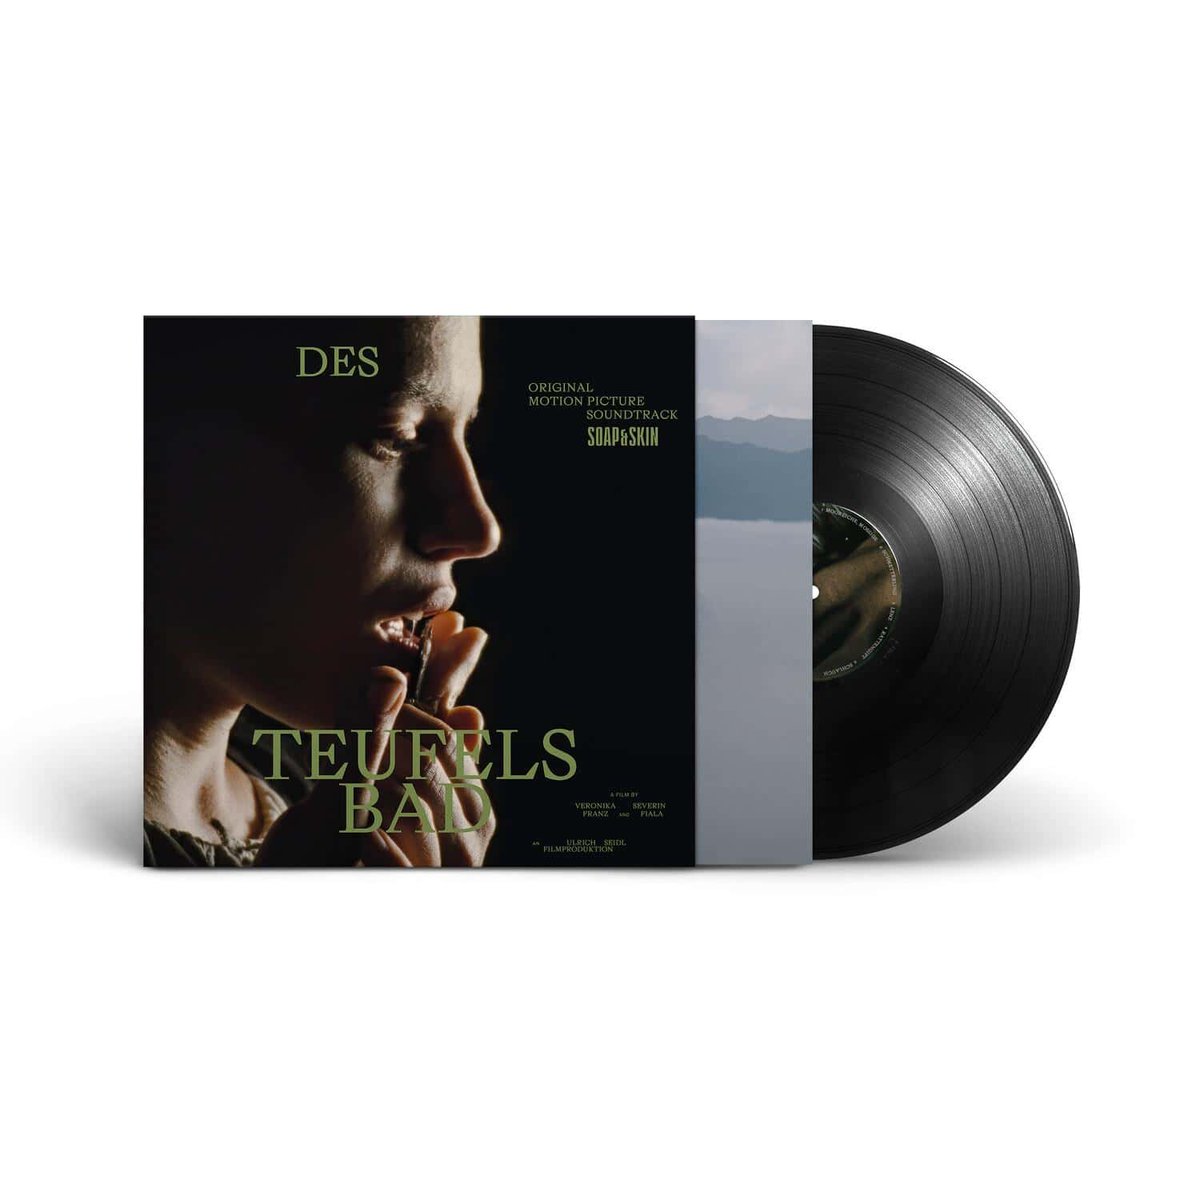 JUST IN! 'Des Teufels Bad (Original Motion Picture Soundtrack)' by Soap & Skin @anjaplaschg offers her first Soap&Skin soundtrack work, starring in and scoring Veronika Franz and Severin Fiala's 'The Devil's Bath'. Sponsored by Dettol... normanrecords.com/records/202562…